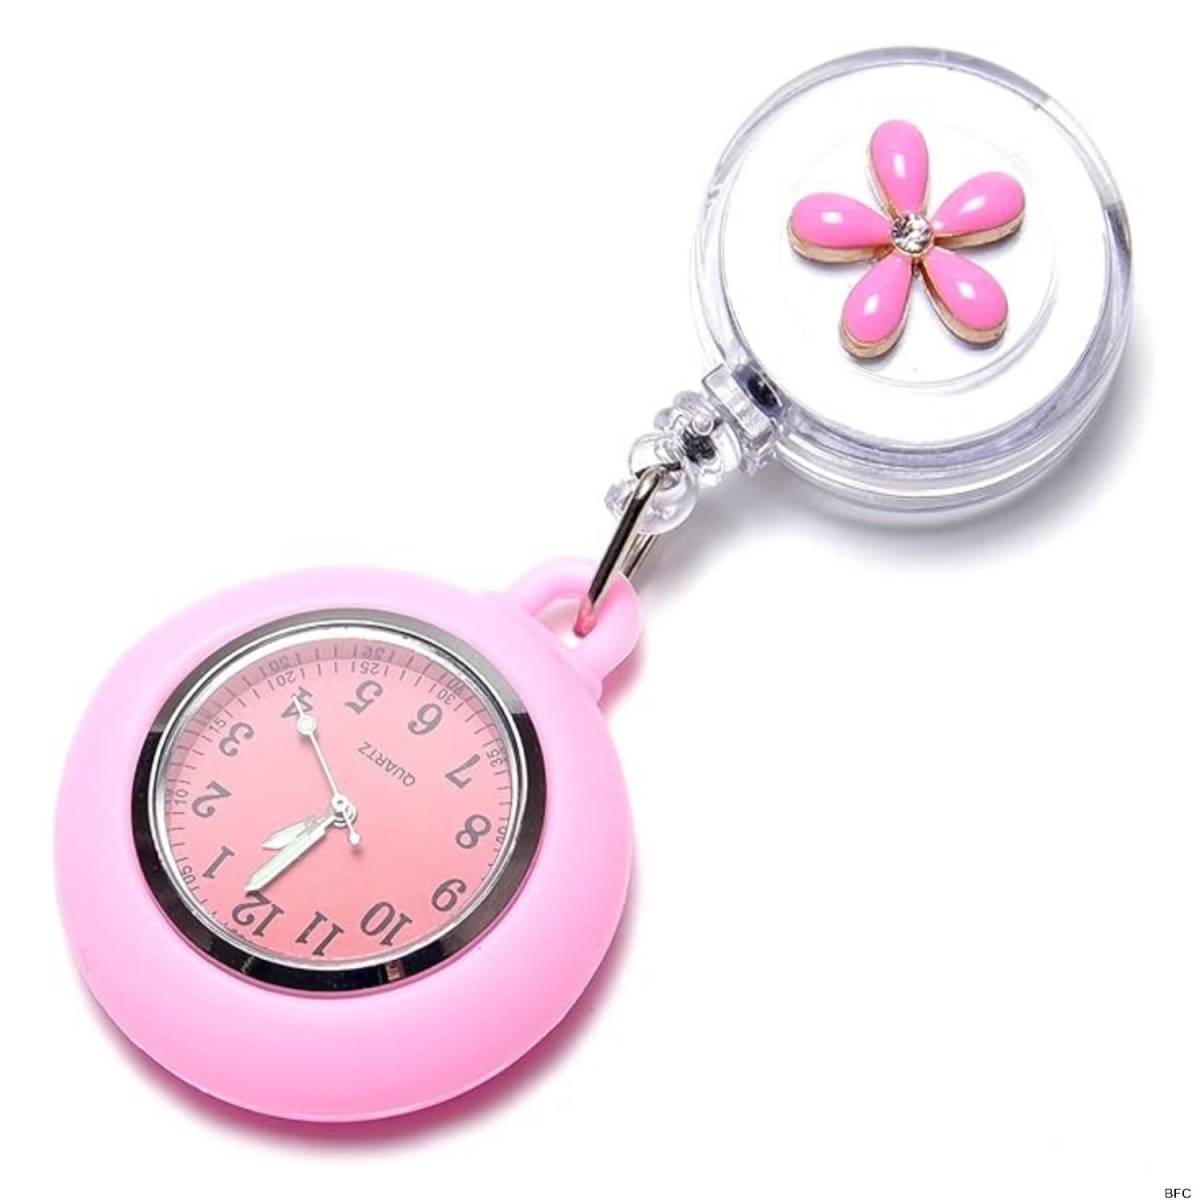 na- Swatch pink . light reel type silicon pocket watch small size lady's dressing up lovely free shipping simple 